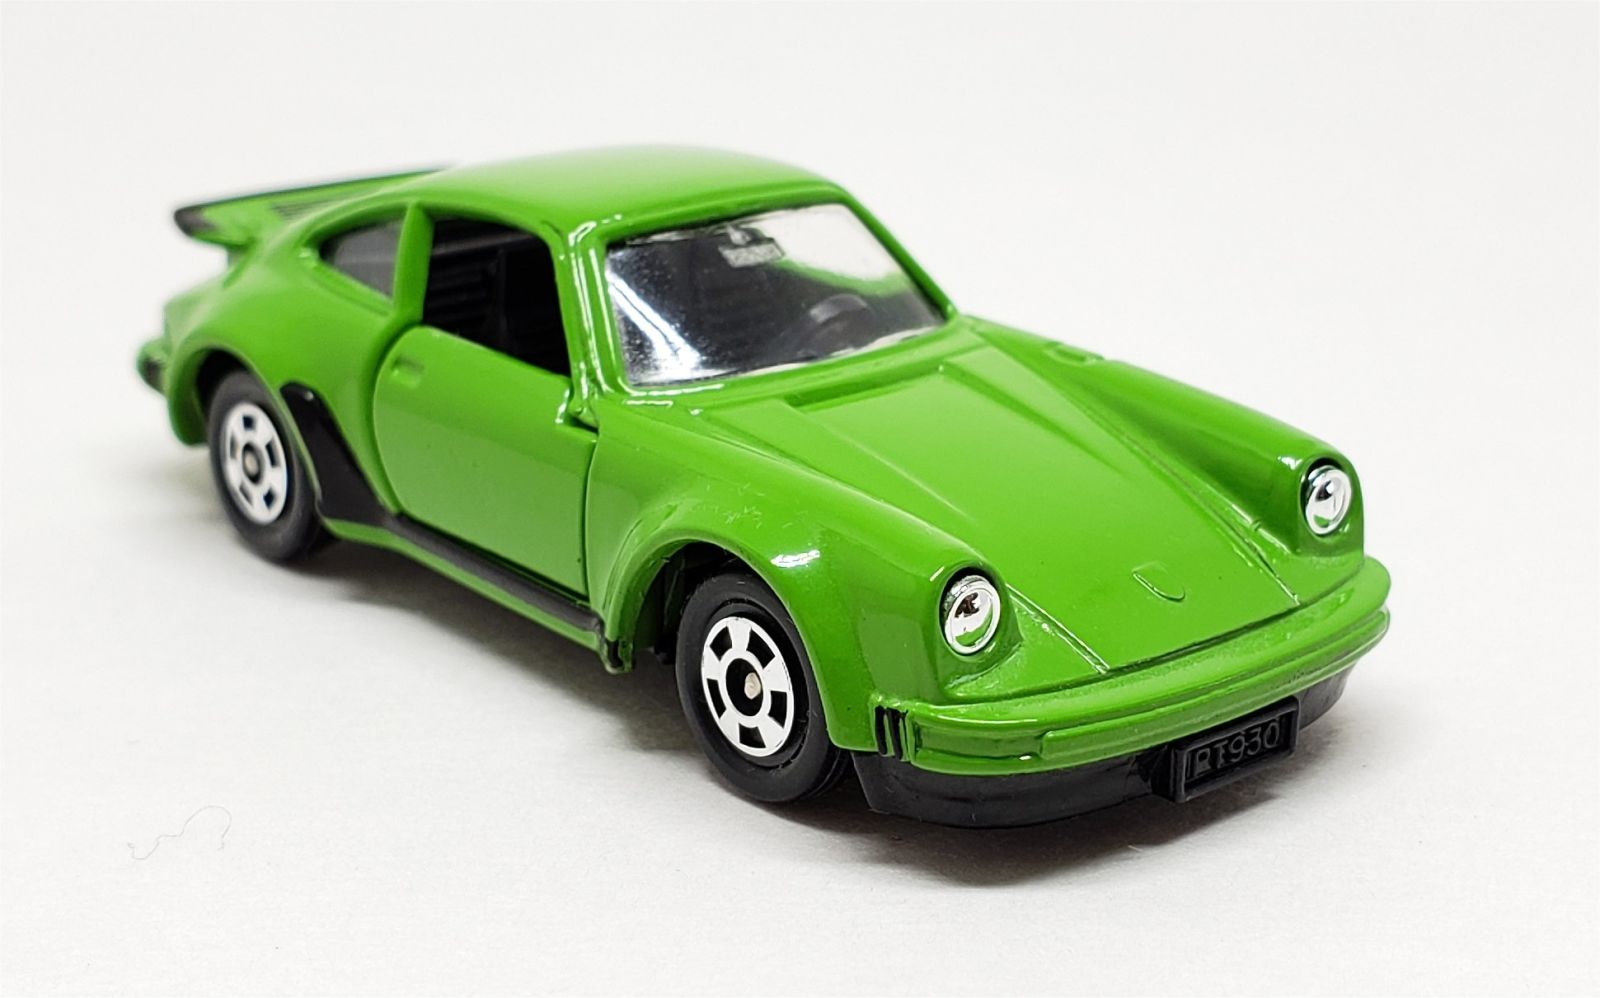 Illustration for article titled [REVIEW] Tomica Porsche 930 Turbo